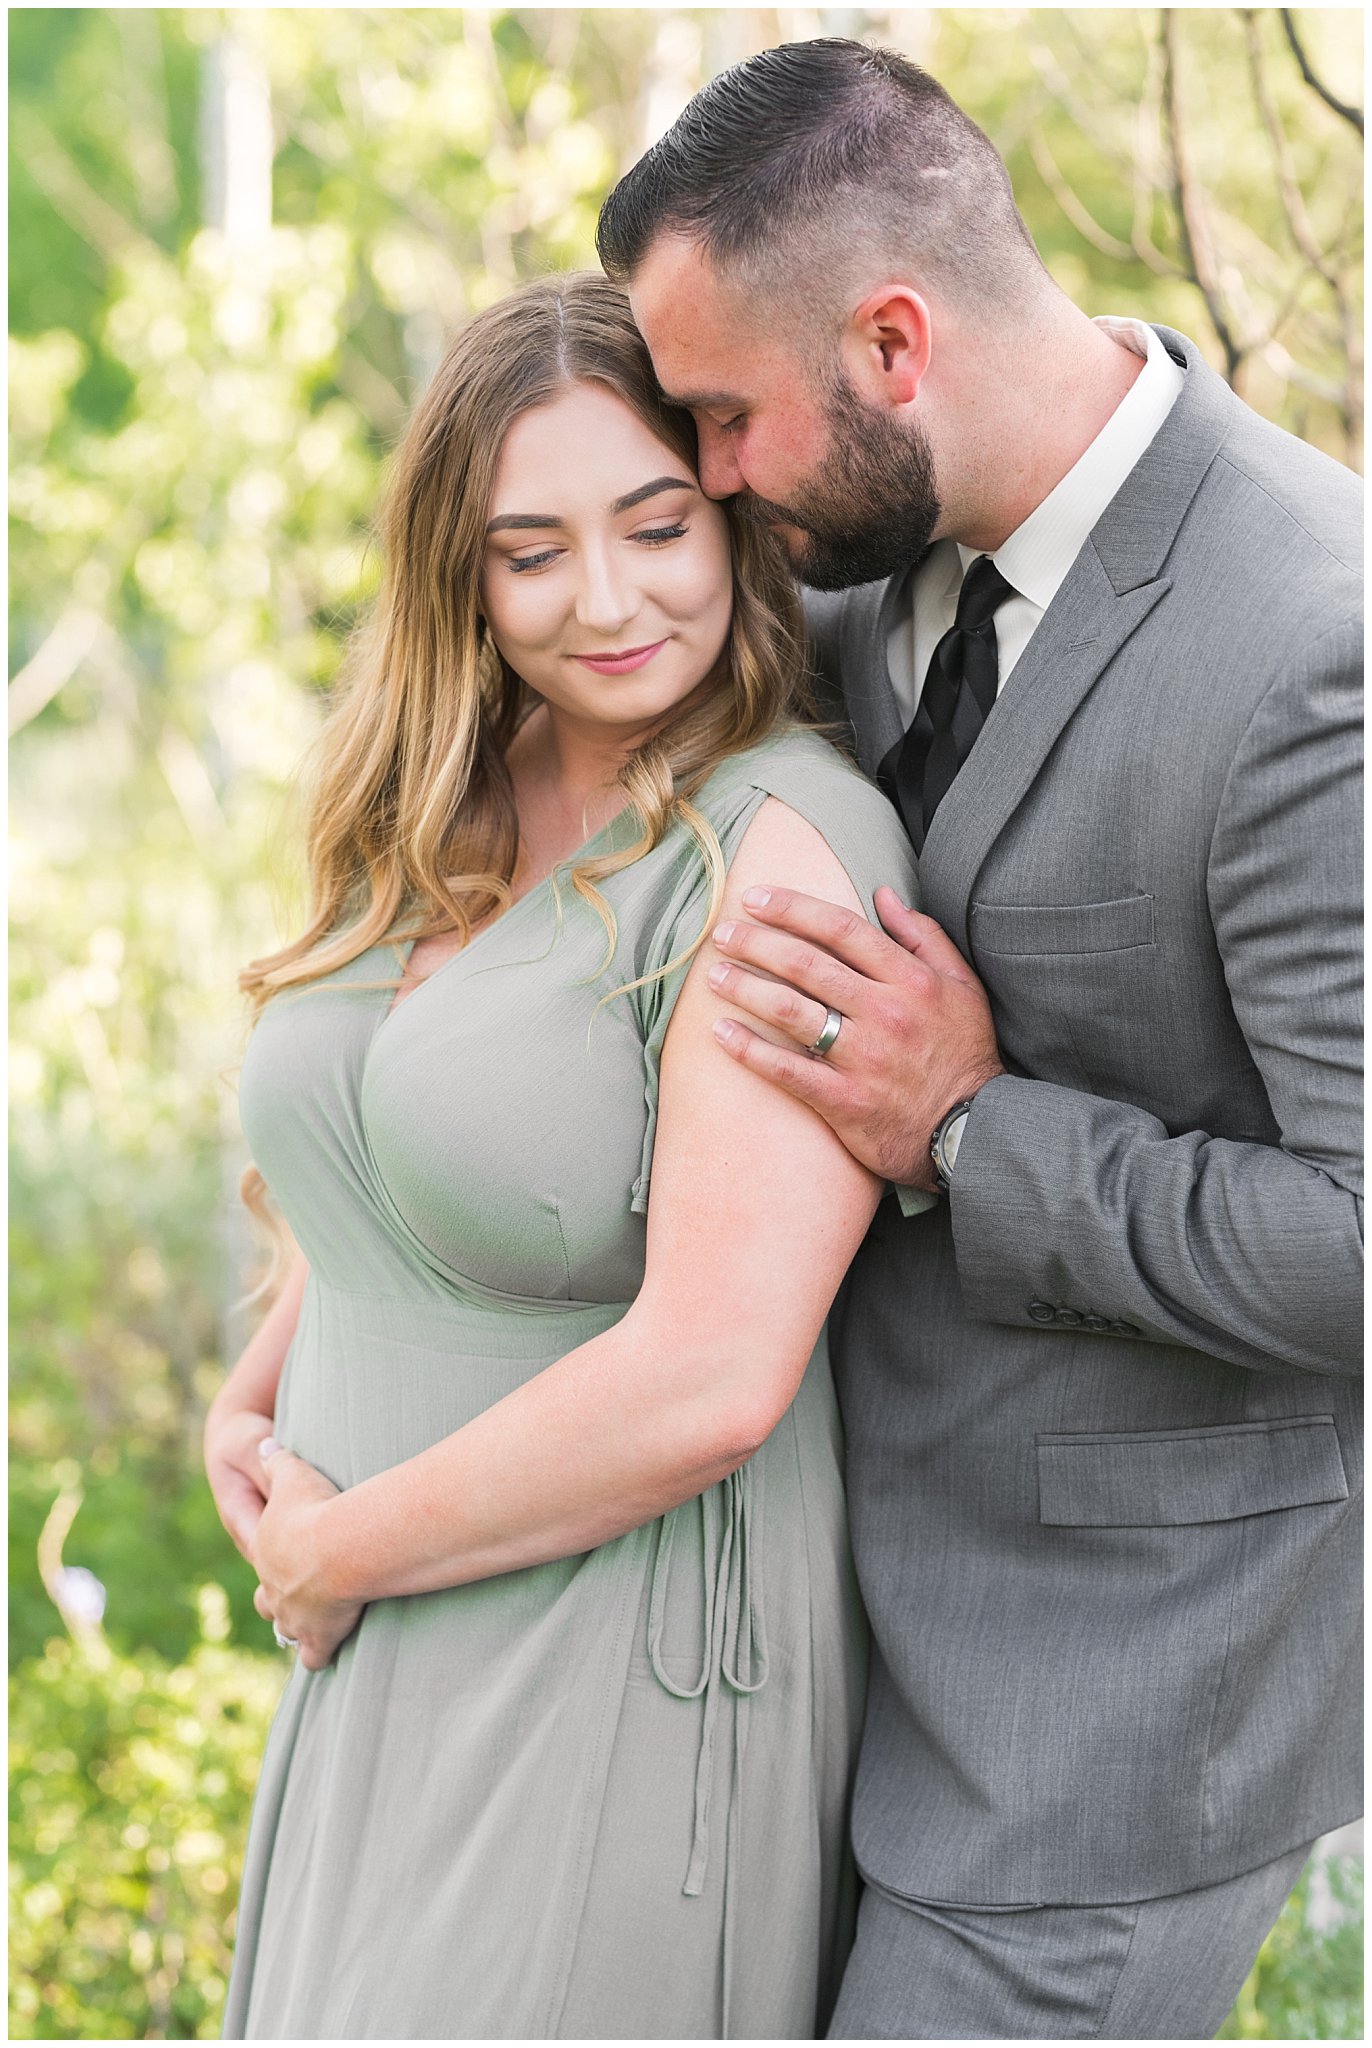 Couple in sage green dress and grey suit in aspen trees | Tibble Fork Summer Engagement Session | Jessie and Dallin Photography